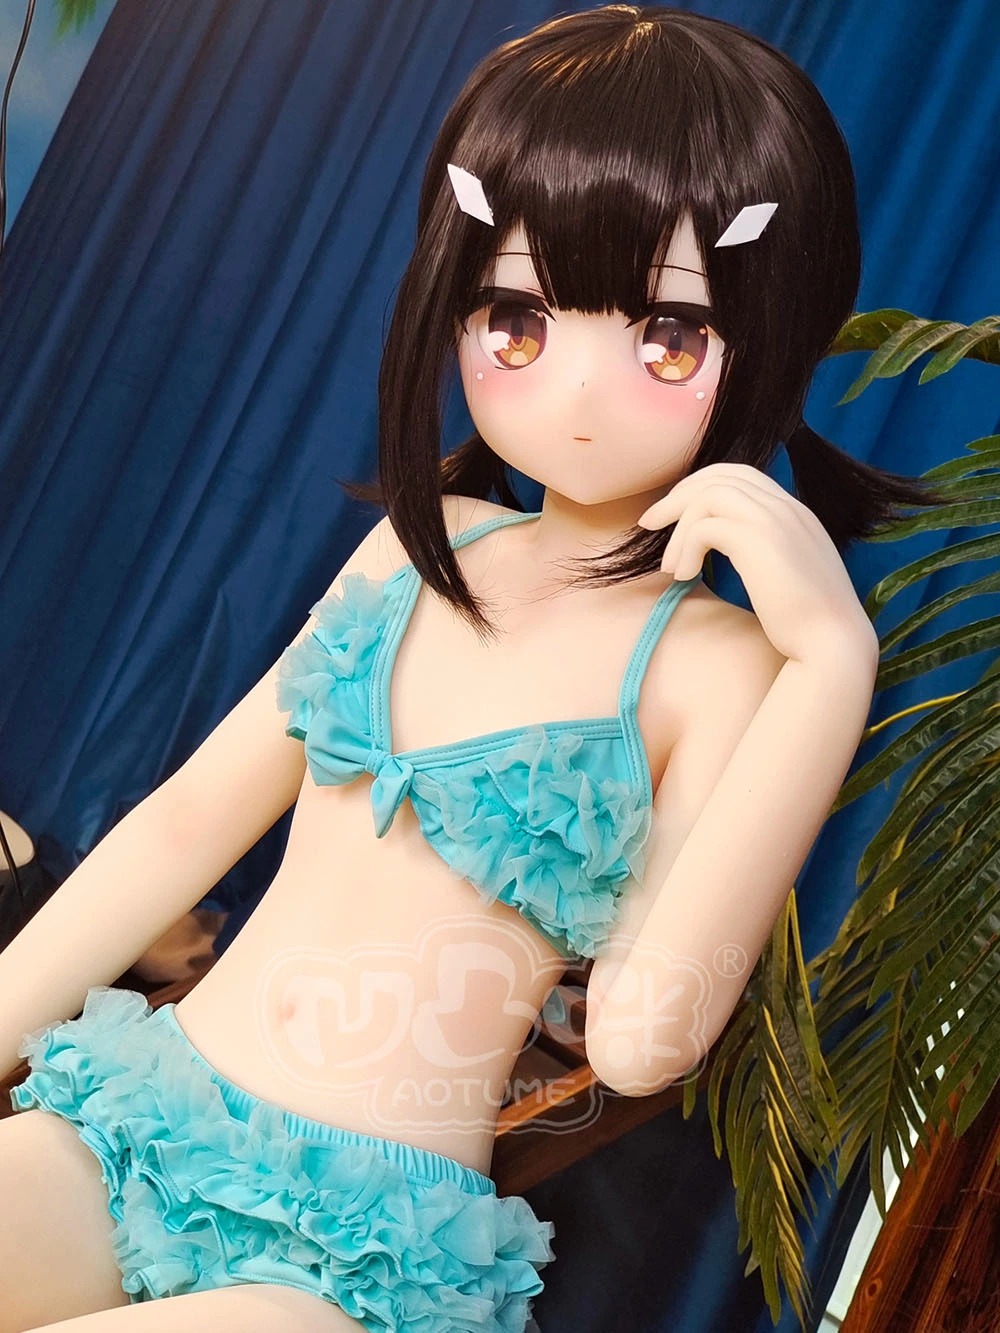 Fate/stay night Cosplay SexDoll